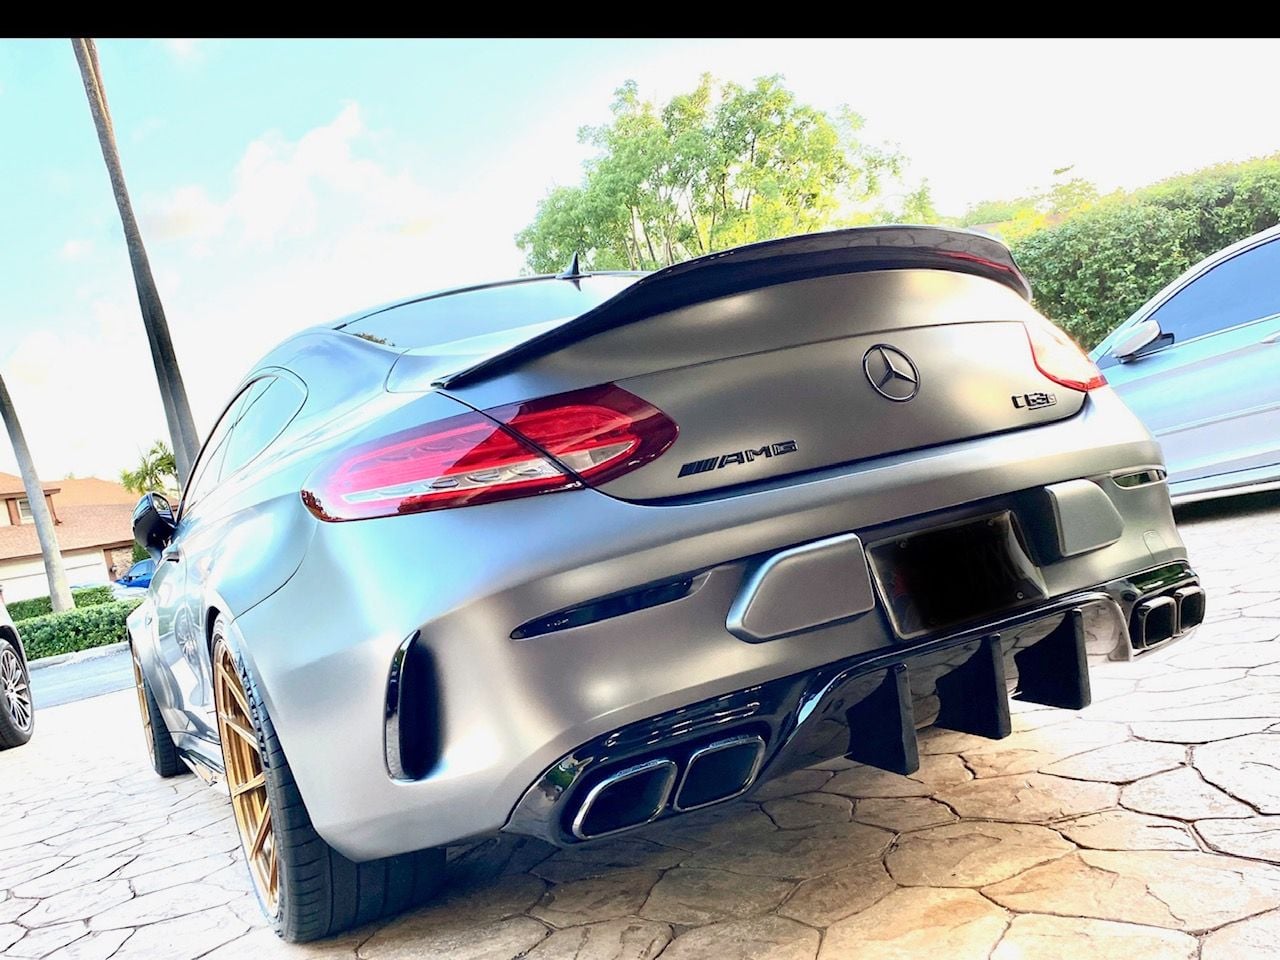 Exterior Body Parts - RX Carbon 2019 Carbon Fiber Diffuser with 2019 AMG tailpipes (Black) - Used - 2016 to 2020 Mercedes-Benz C63 AMG S - Miami, FL 33185, United States